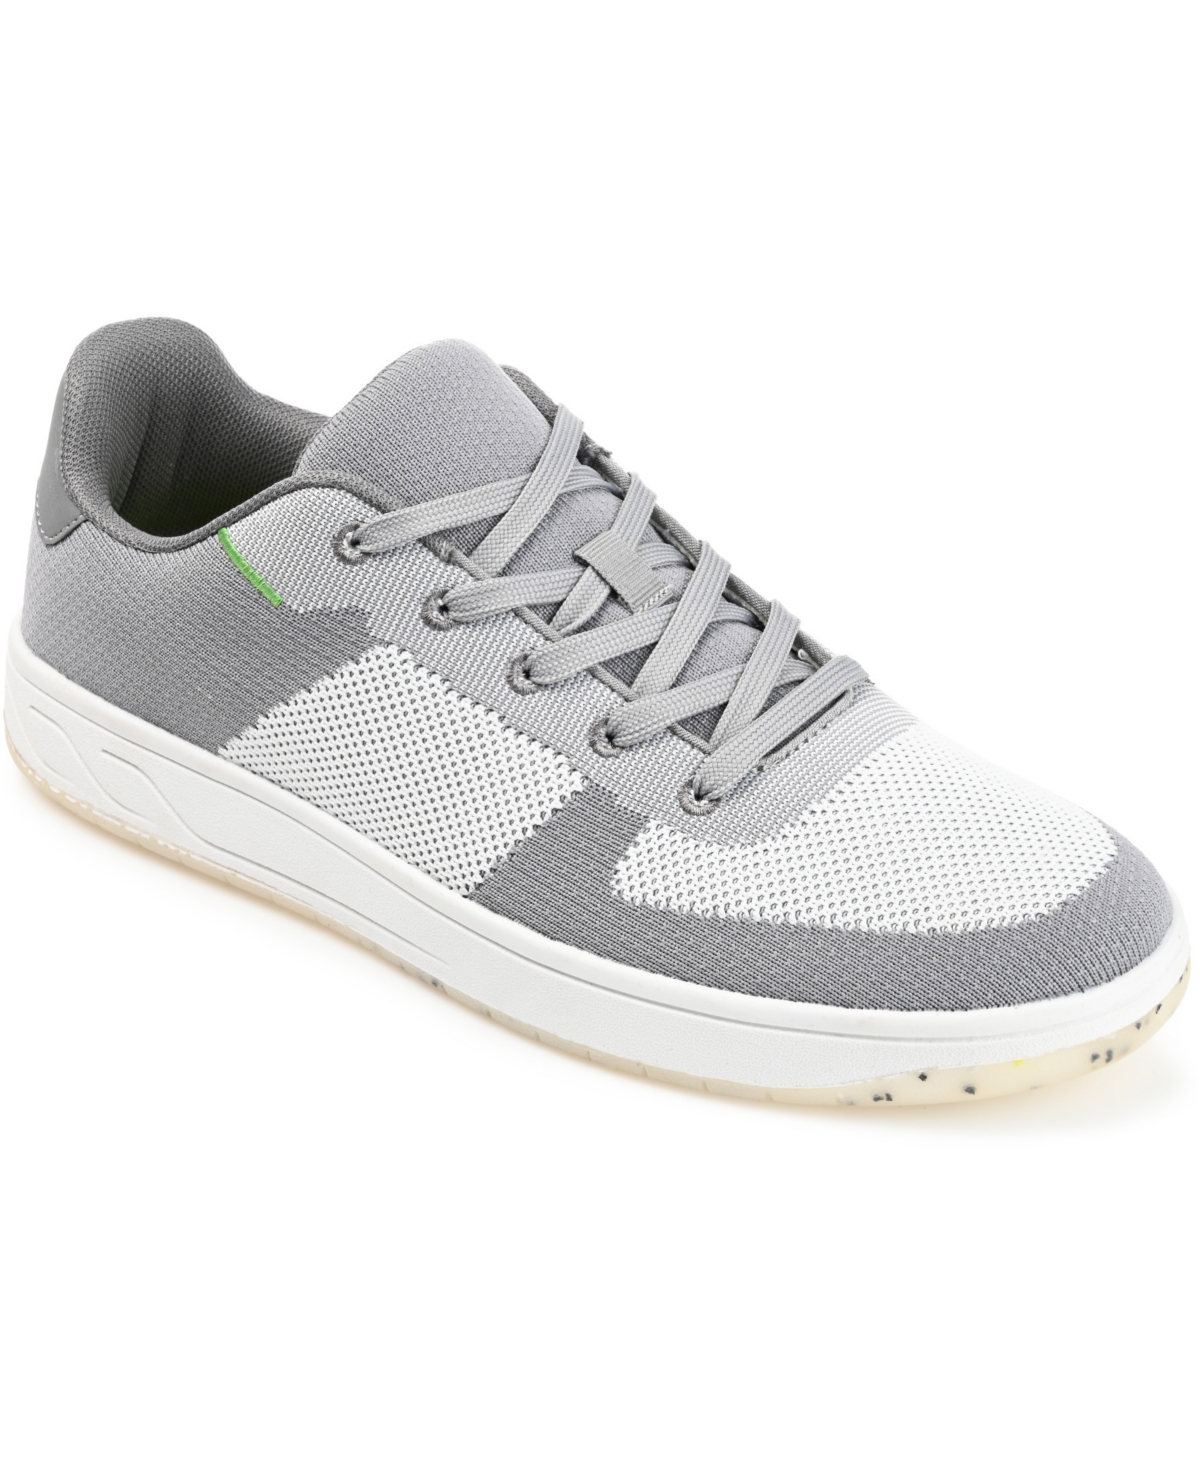 Men's Topher Knit Athleisure Sneakers - Gray